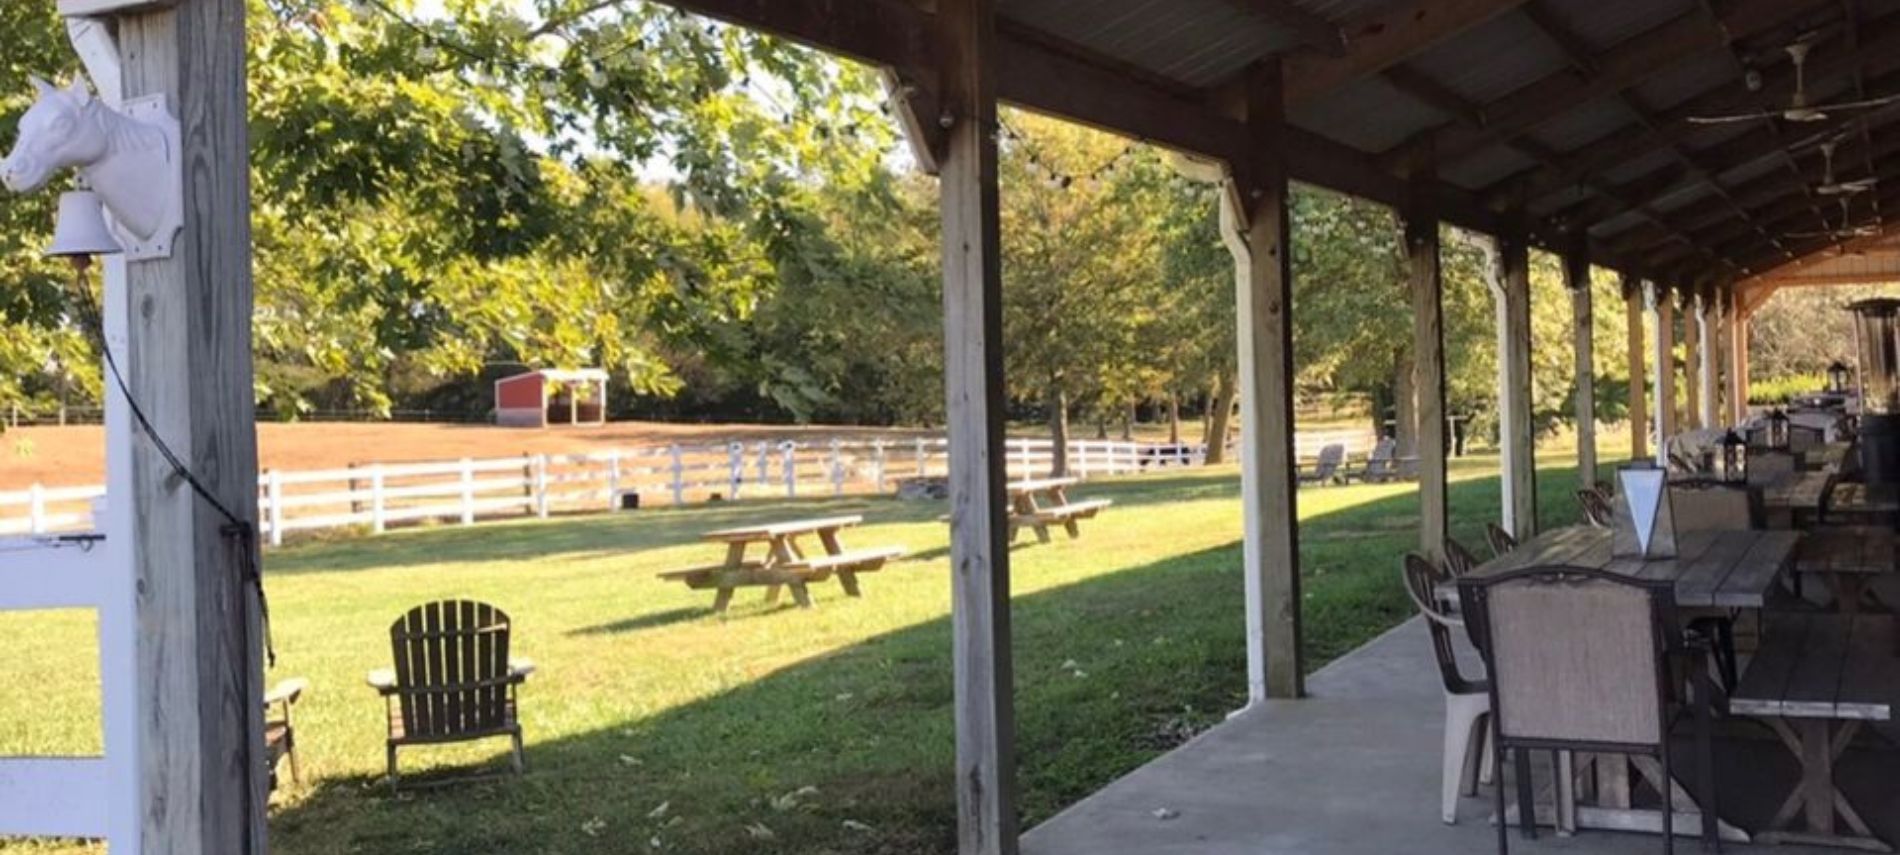 View of the patio at Crooked Creek with picnic tables, fence and horse pasture